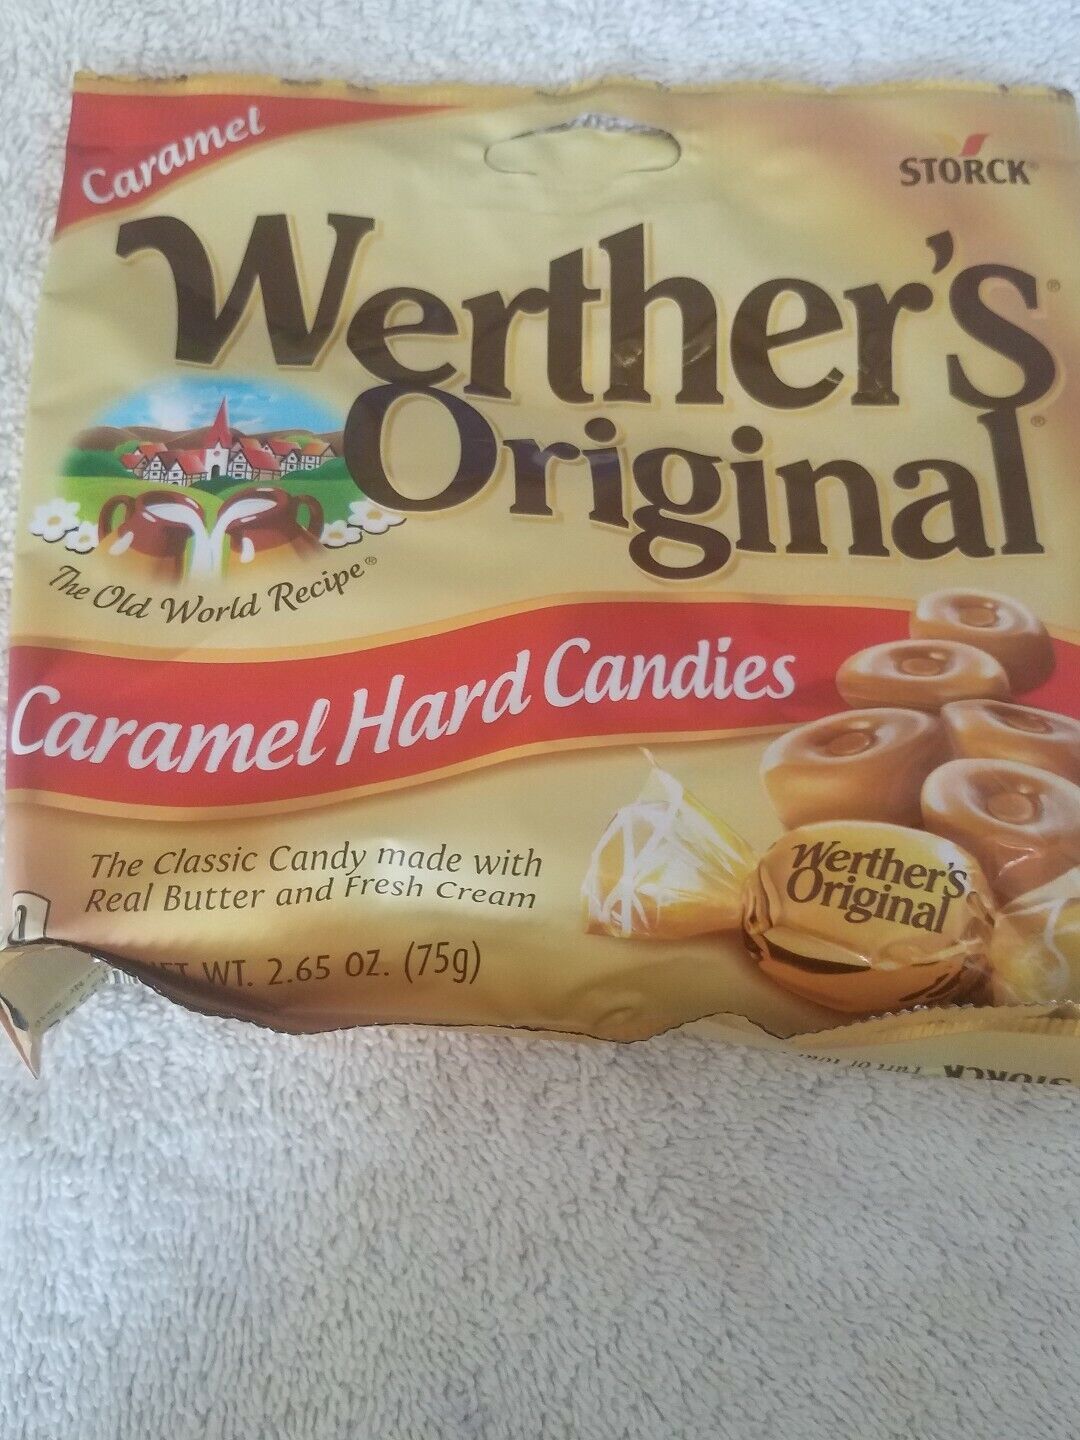 Primary image for Werther's Original Carmel Hard Candies 2.65 oz. upc 072799035426